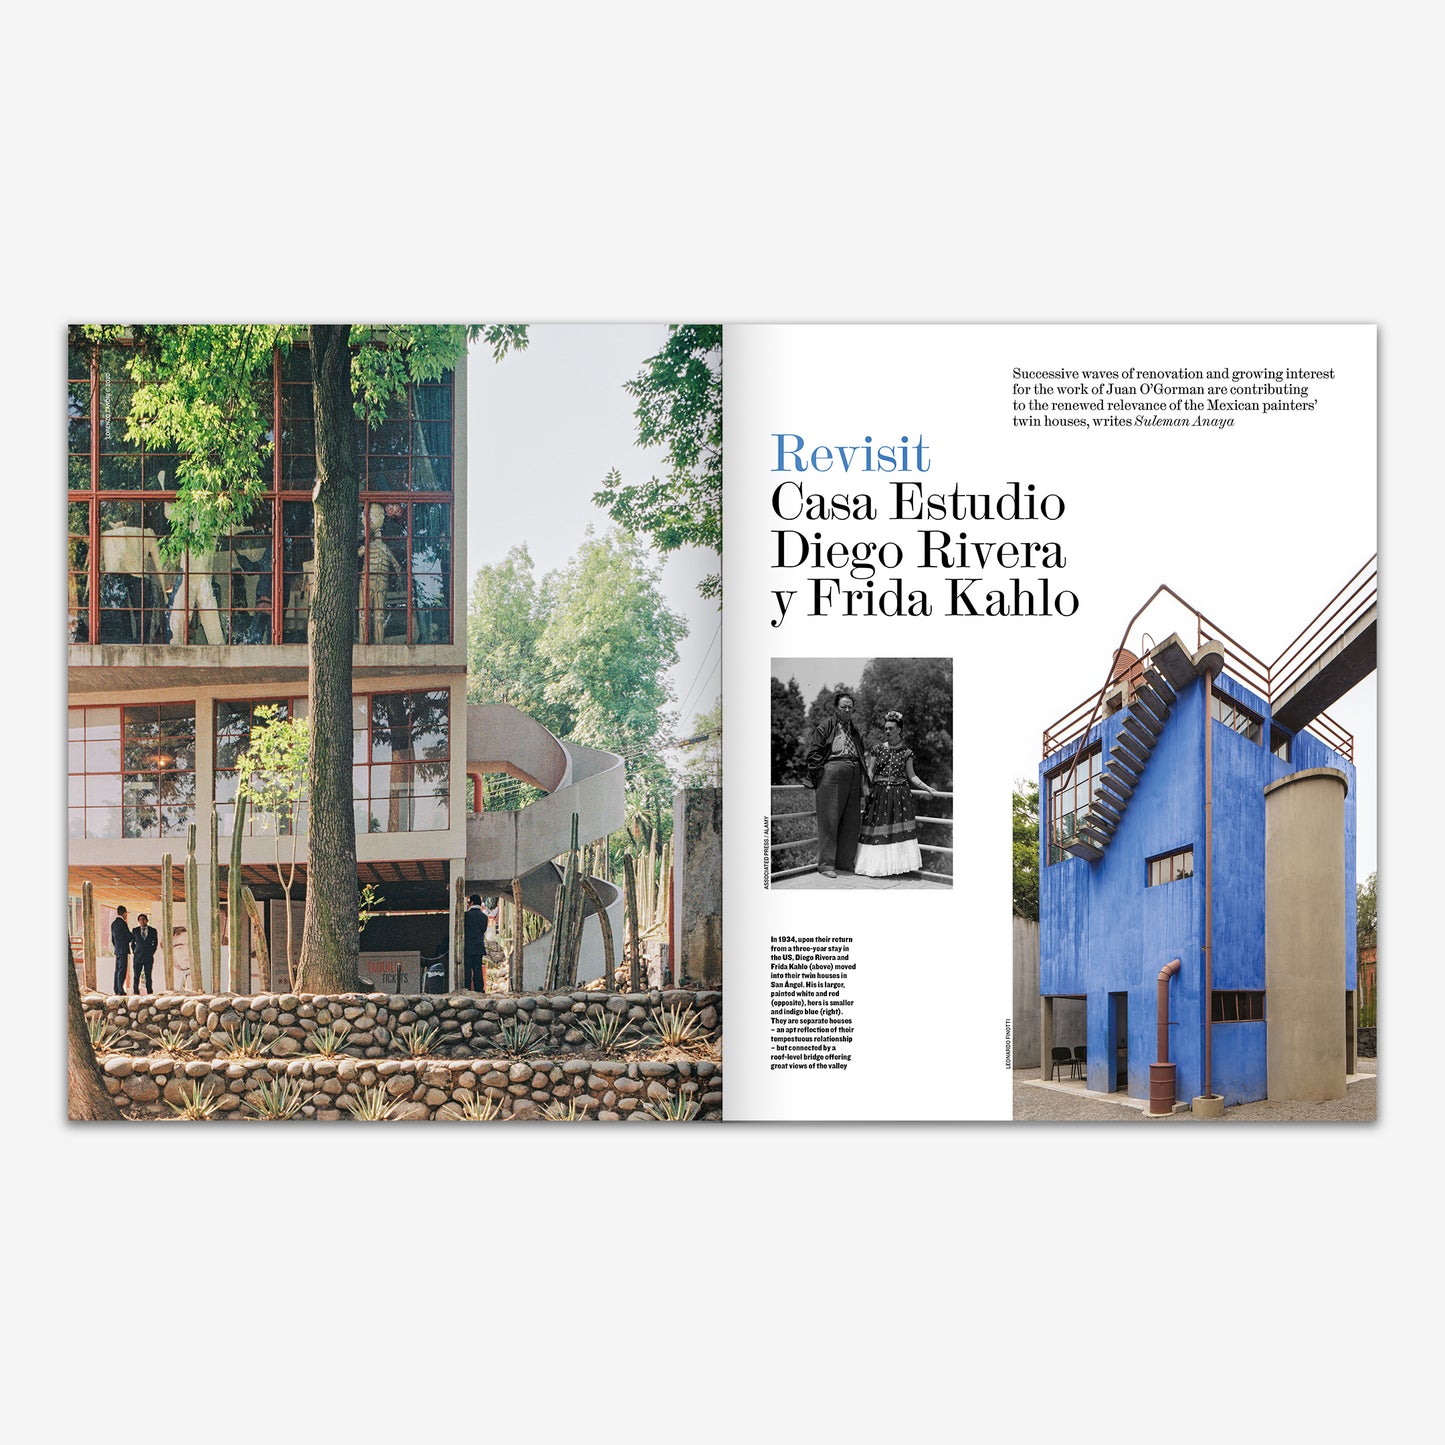 The artist’s house + AR House: The Architectural Review issue 1507, December 2023/January 2024